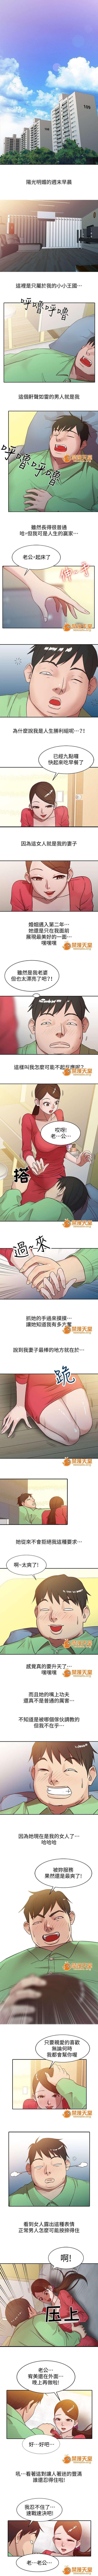 Groupsex 受制於他 1-30 Gay Party - Page 1